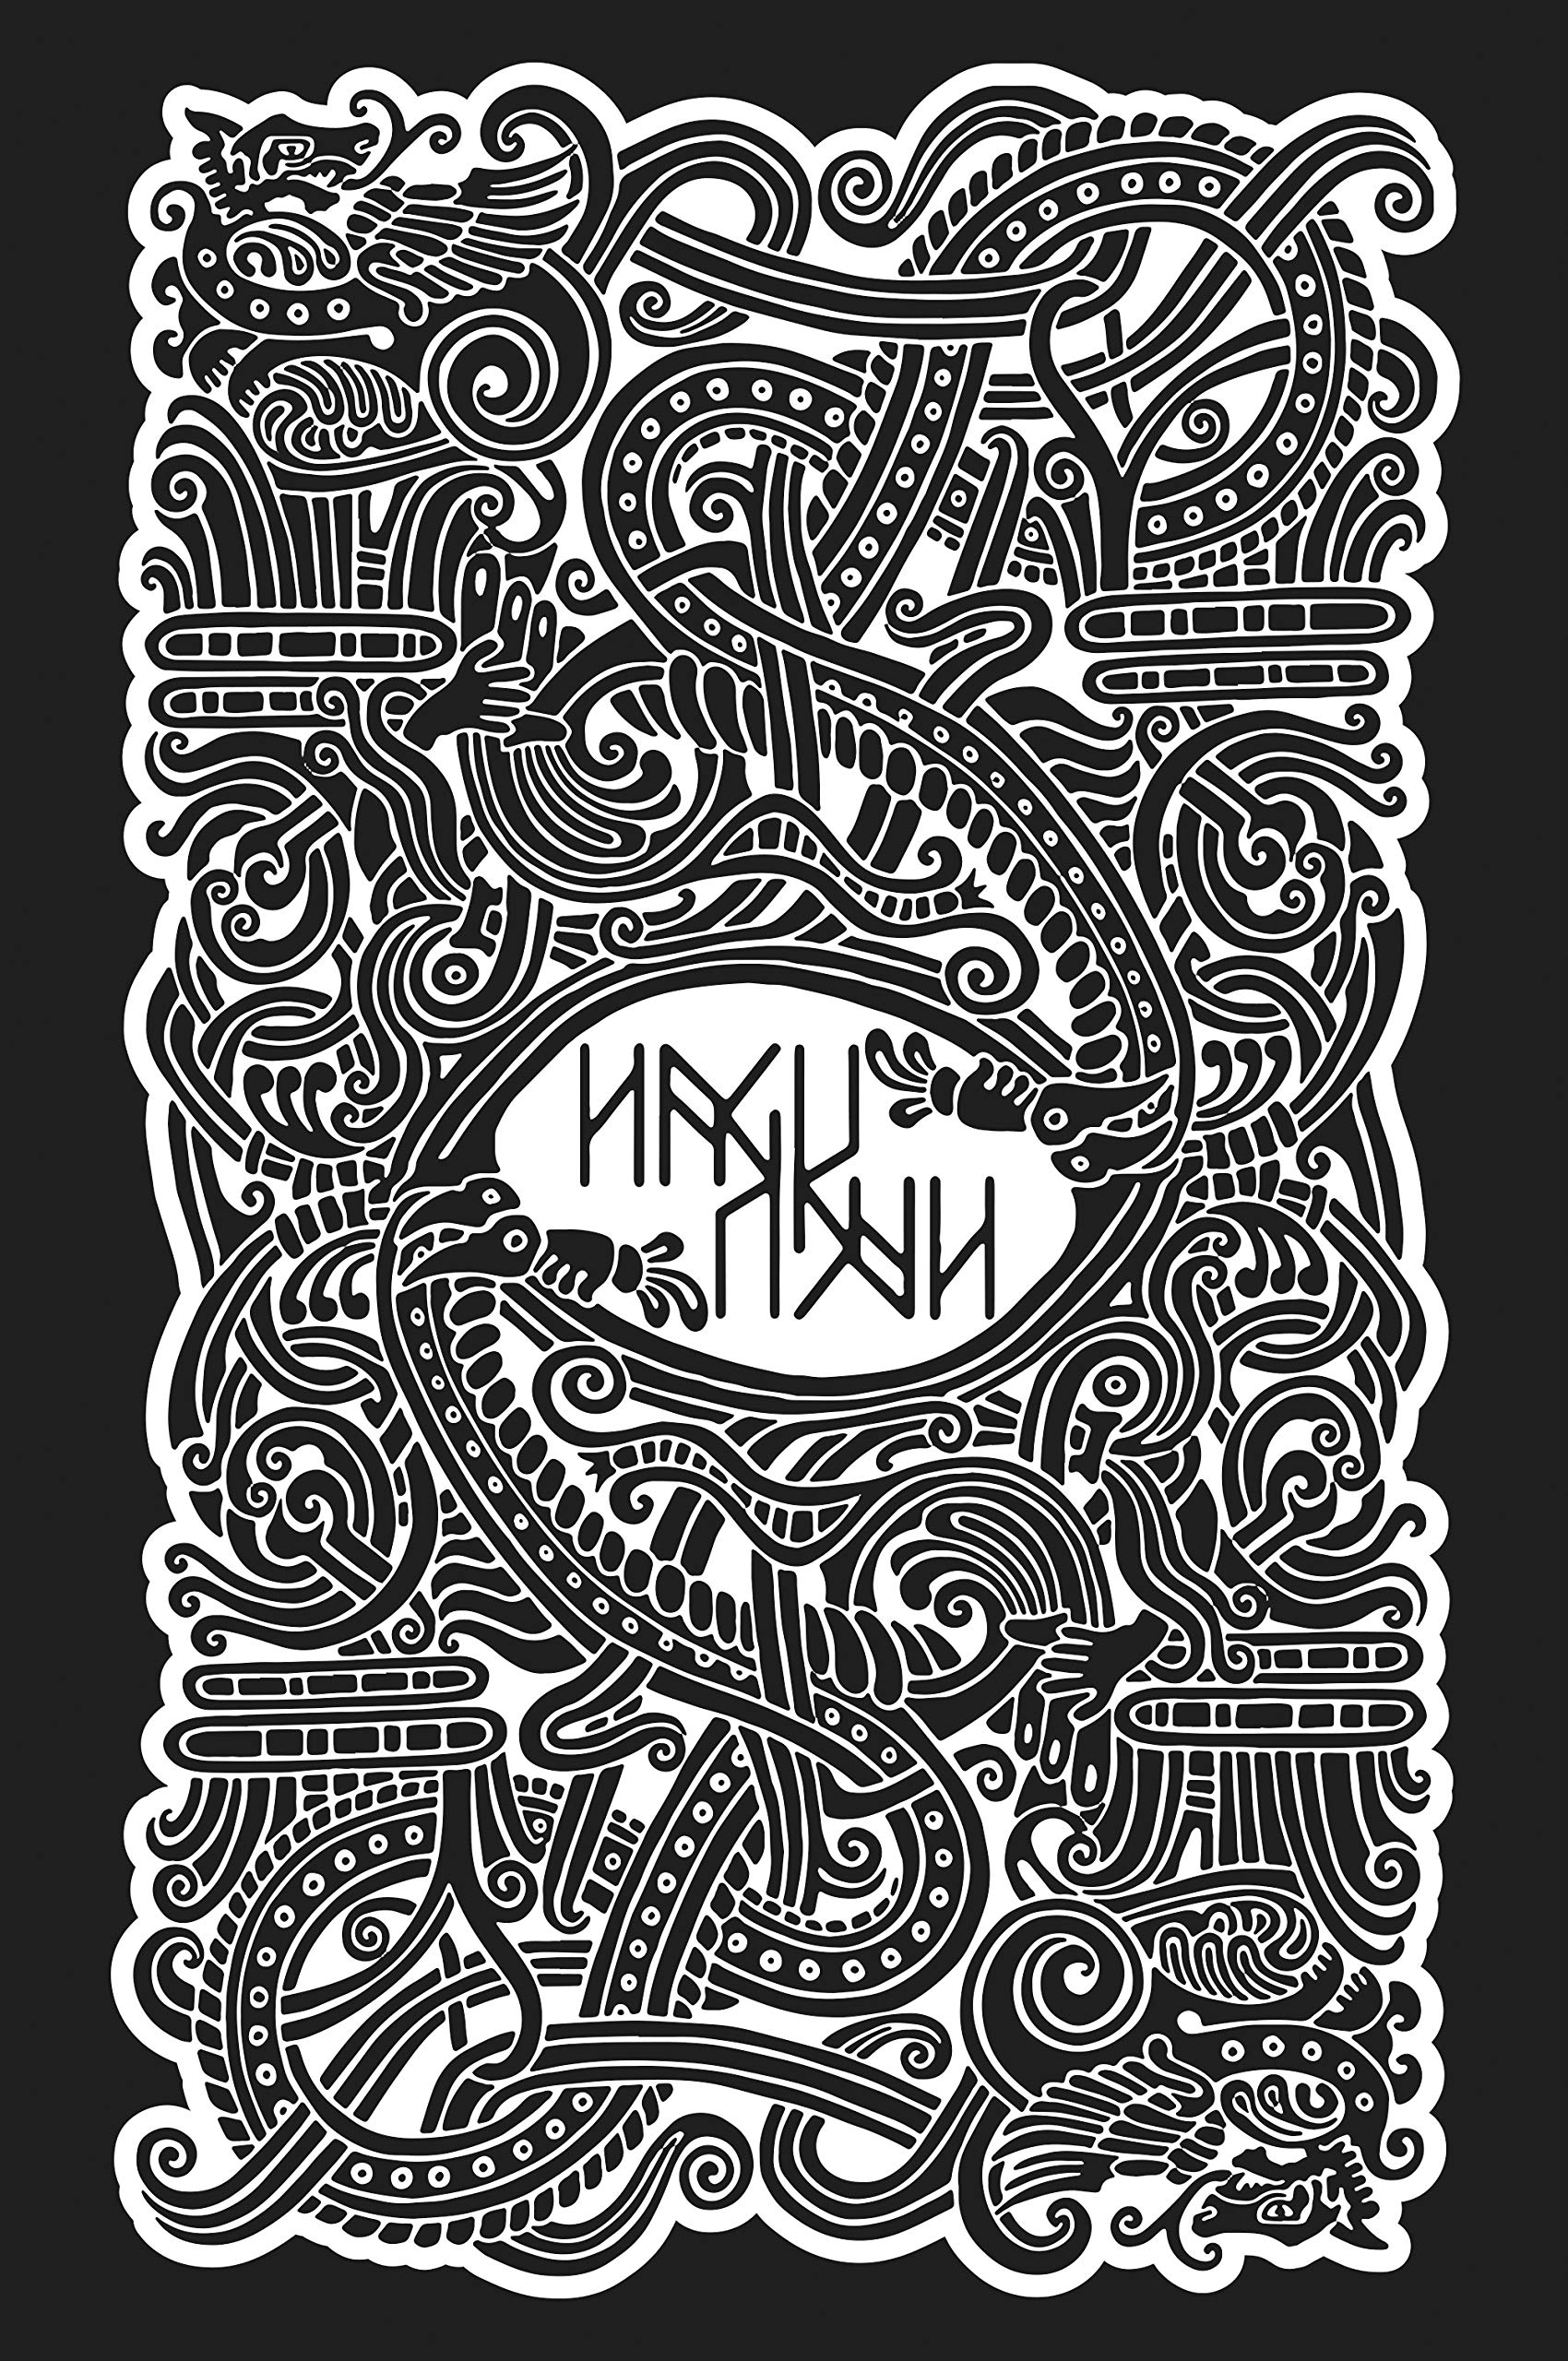 Yggdrasil: Norse Divination Cards